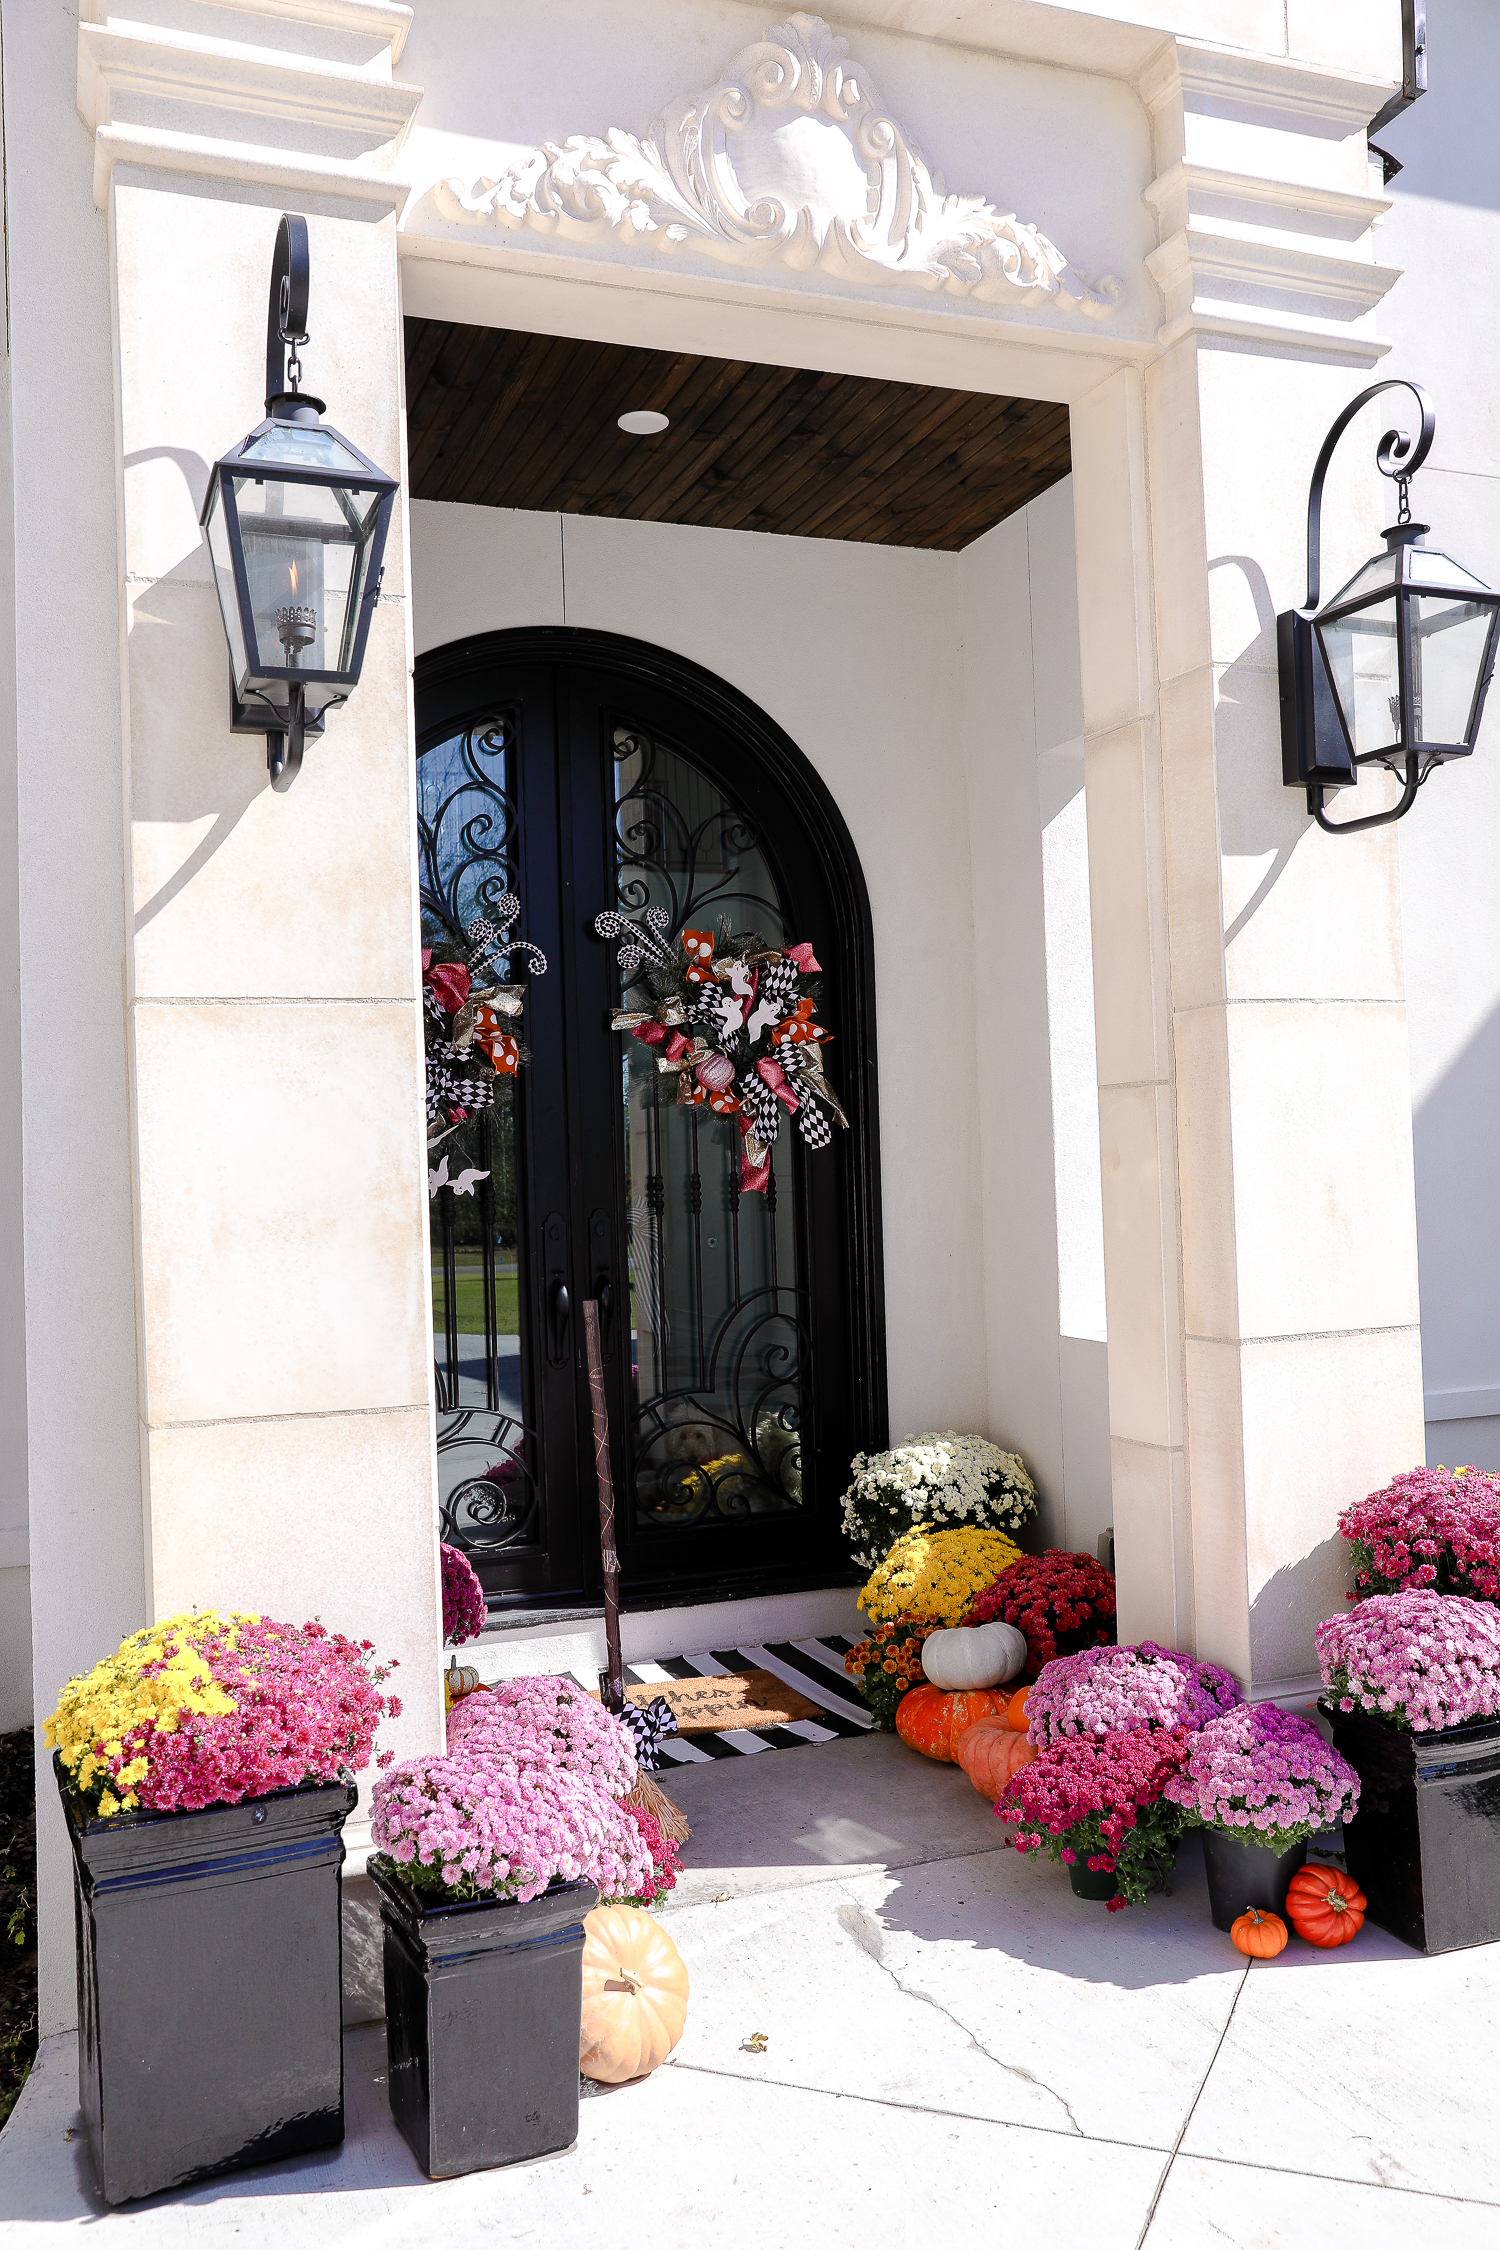 solar gas lights, luxury custom build home, pink mums, front door decor striped rug, pink mums, fall halloween decor, shop hello holidays, emily gemma | Fall & Halloween Home Decor Tour by popular Oklahoma life and style blog, The Sweetest Thing: image of the front entrance to a home decorated with pink mums, pumpkins, a black and white stripe rug, and a welcome mat.